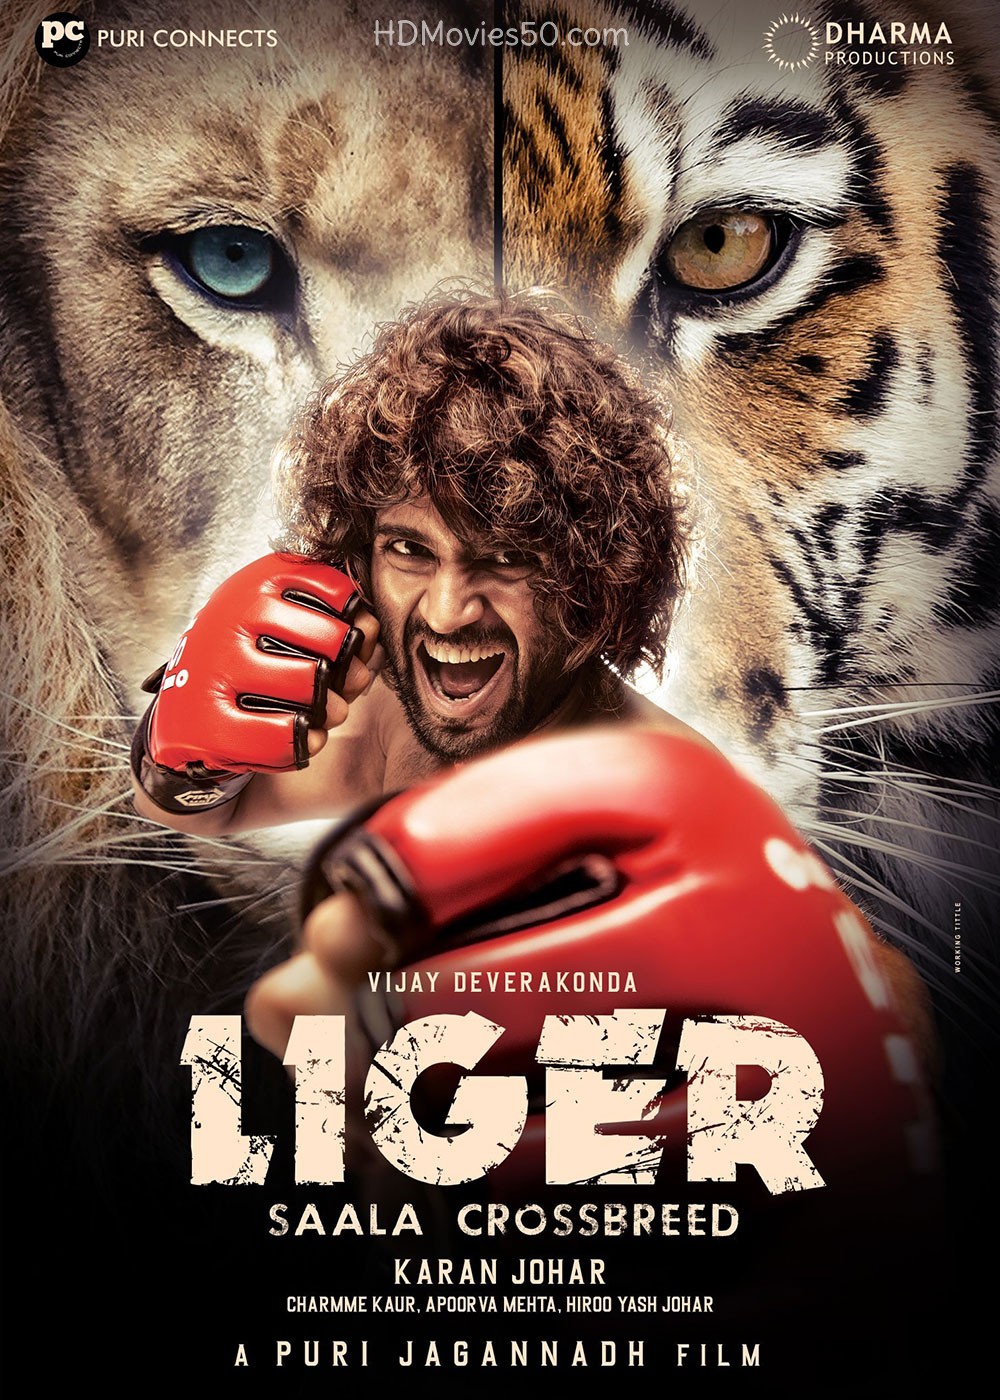 Liger (2022) 480p HDRip Hindi Dubbed (Audio Cleaned) Movie ESubs [400MB]